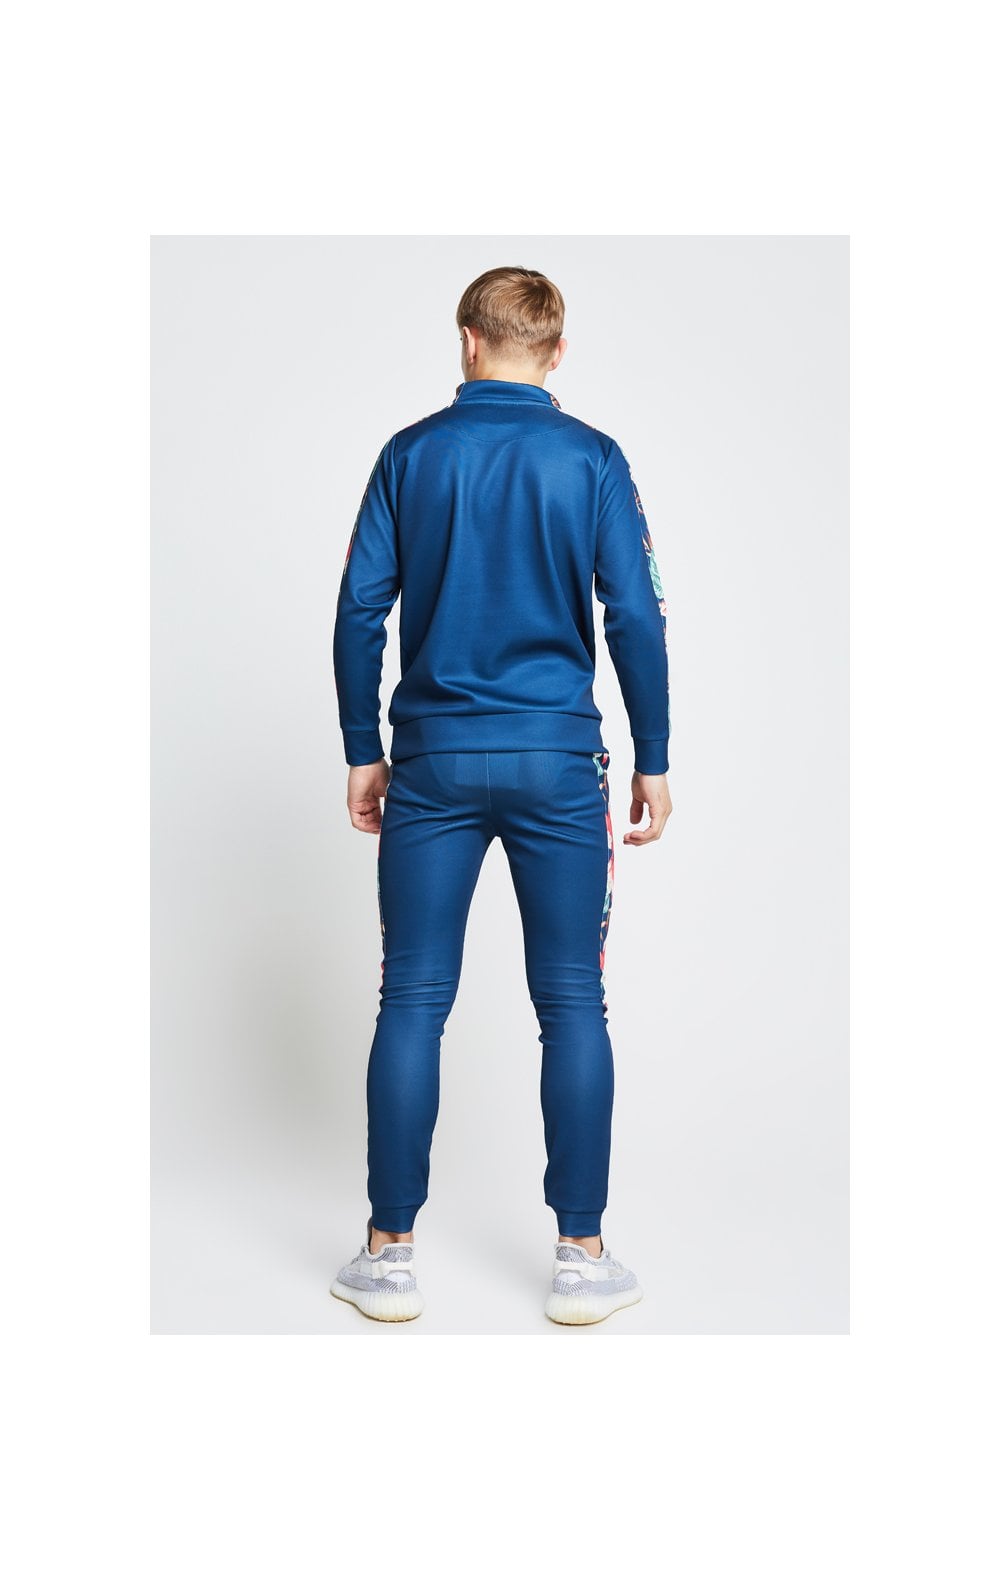 Illusive London Tape Panelled Joggers – Teal & Tropical Leaf (5)